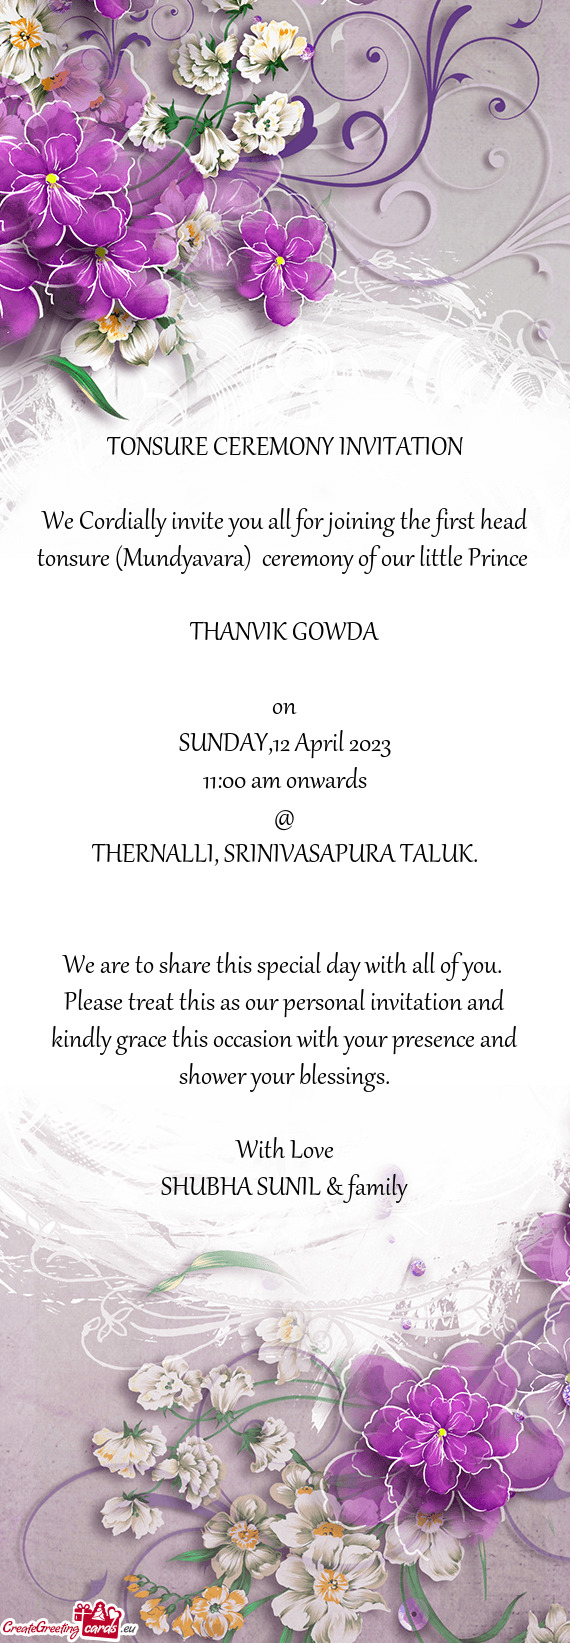 We Cordially invite you all for joining the first head tonsure (Mundyavara) ceremony of our little